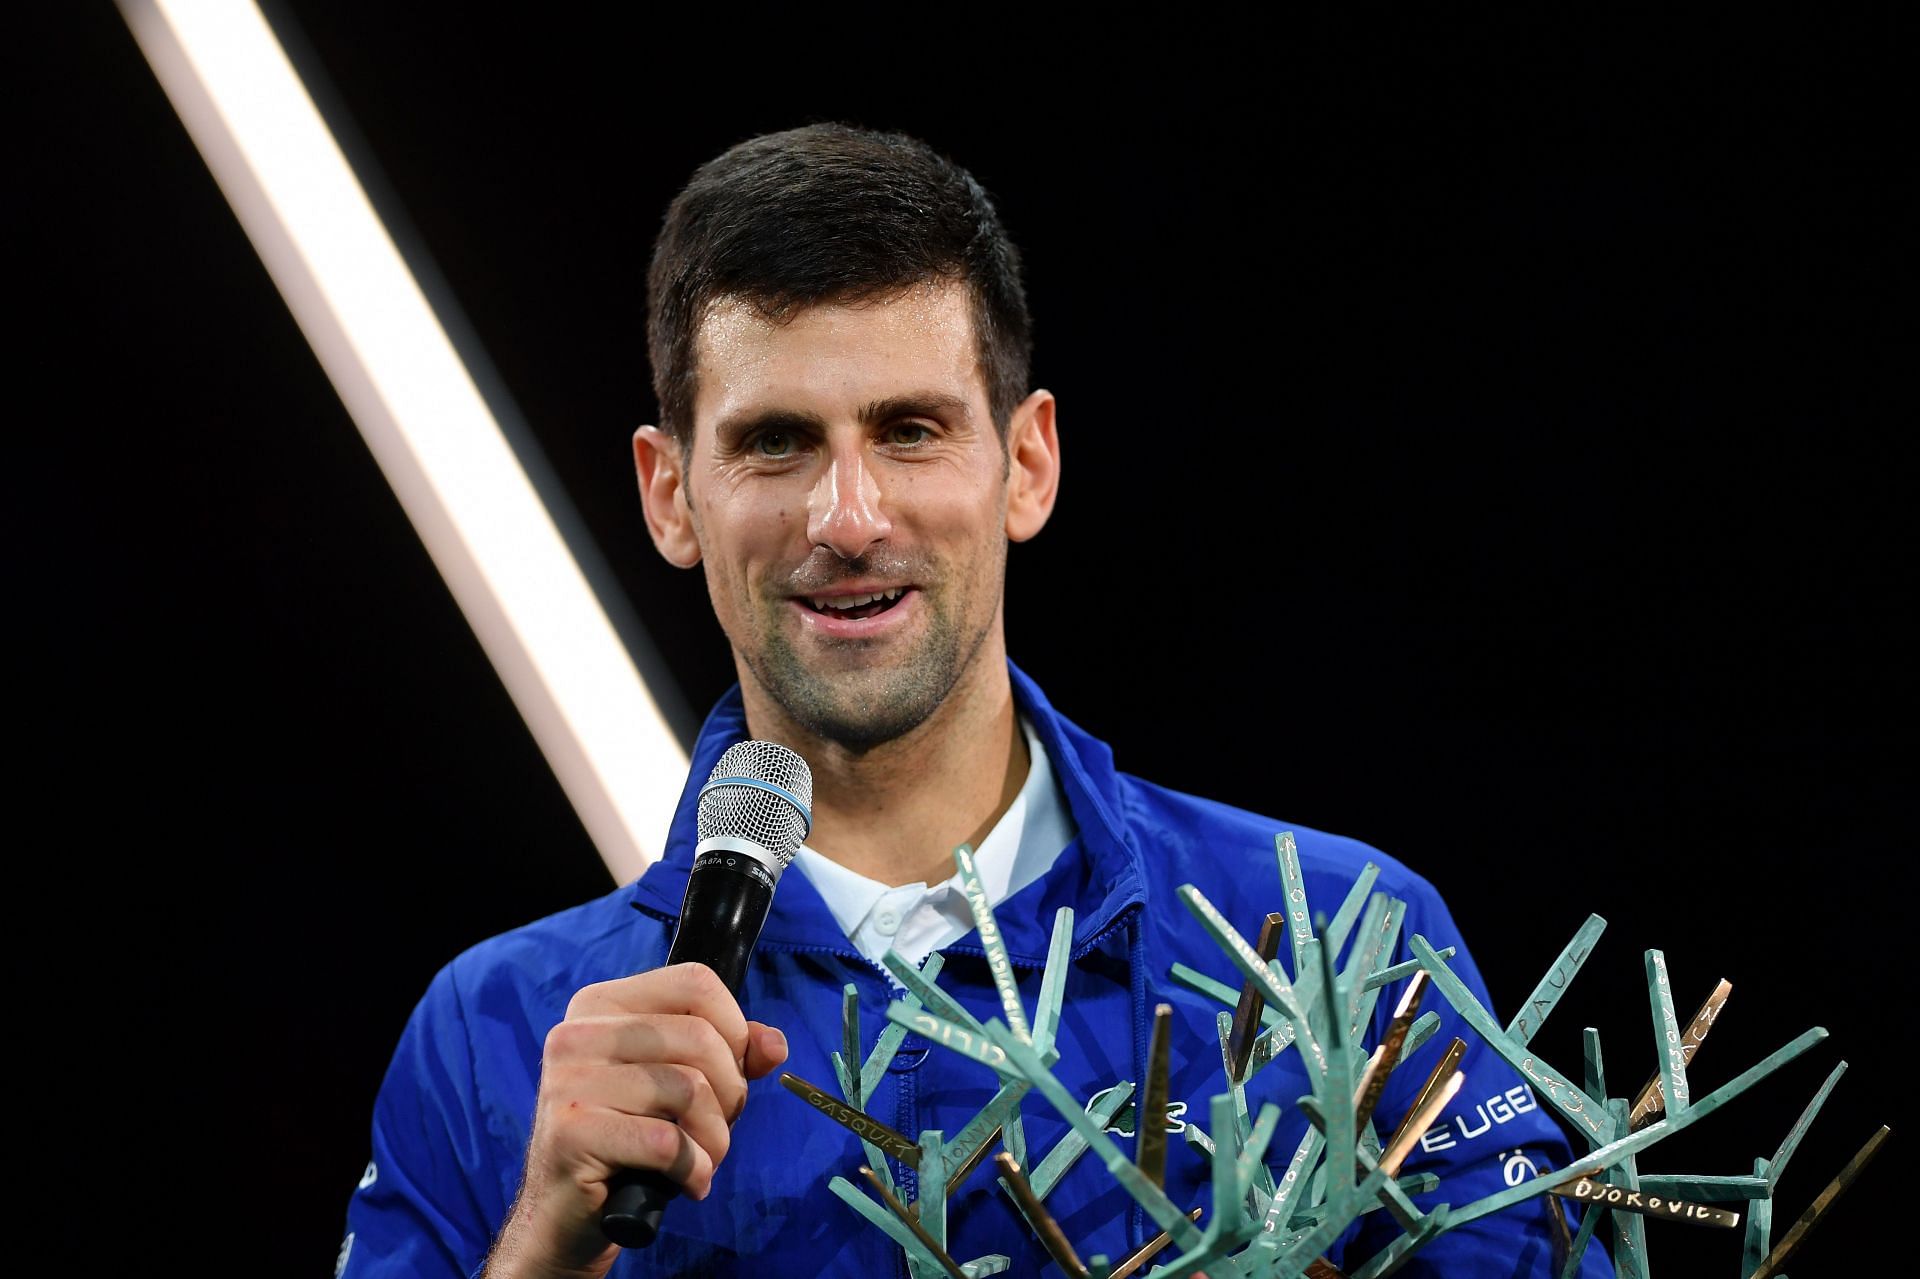 Novak Djokovic with a record-breaking 37th Masters title and sealing his 7th year-end number one finish